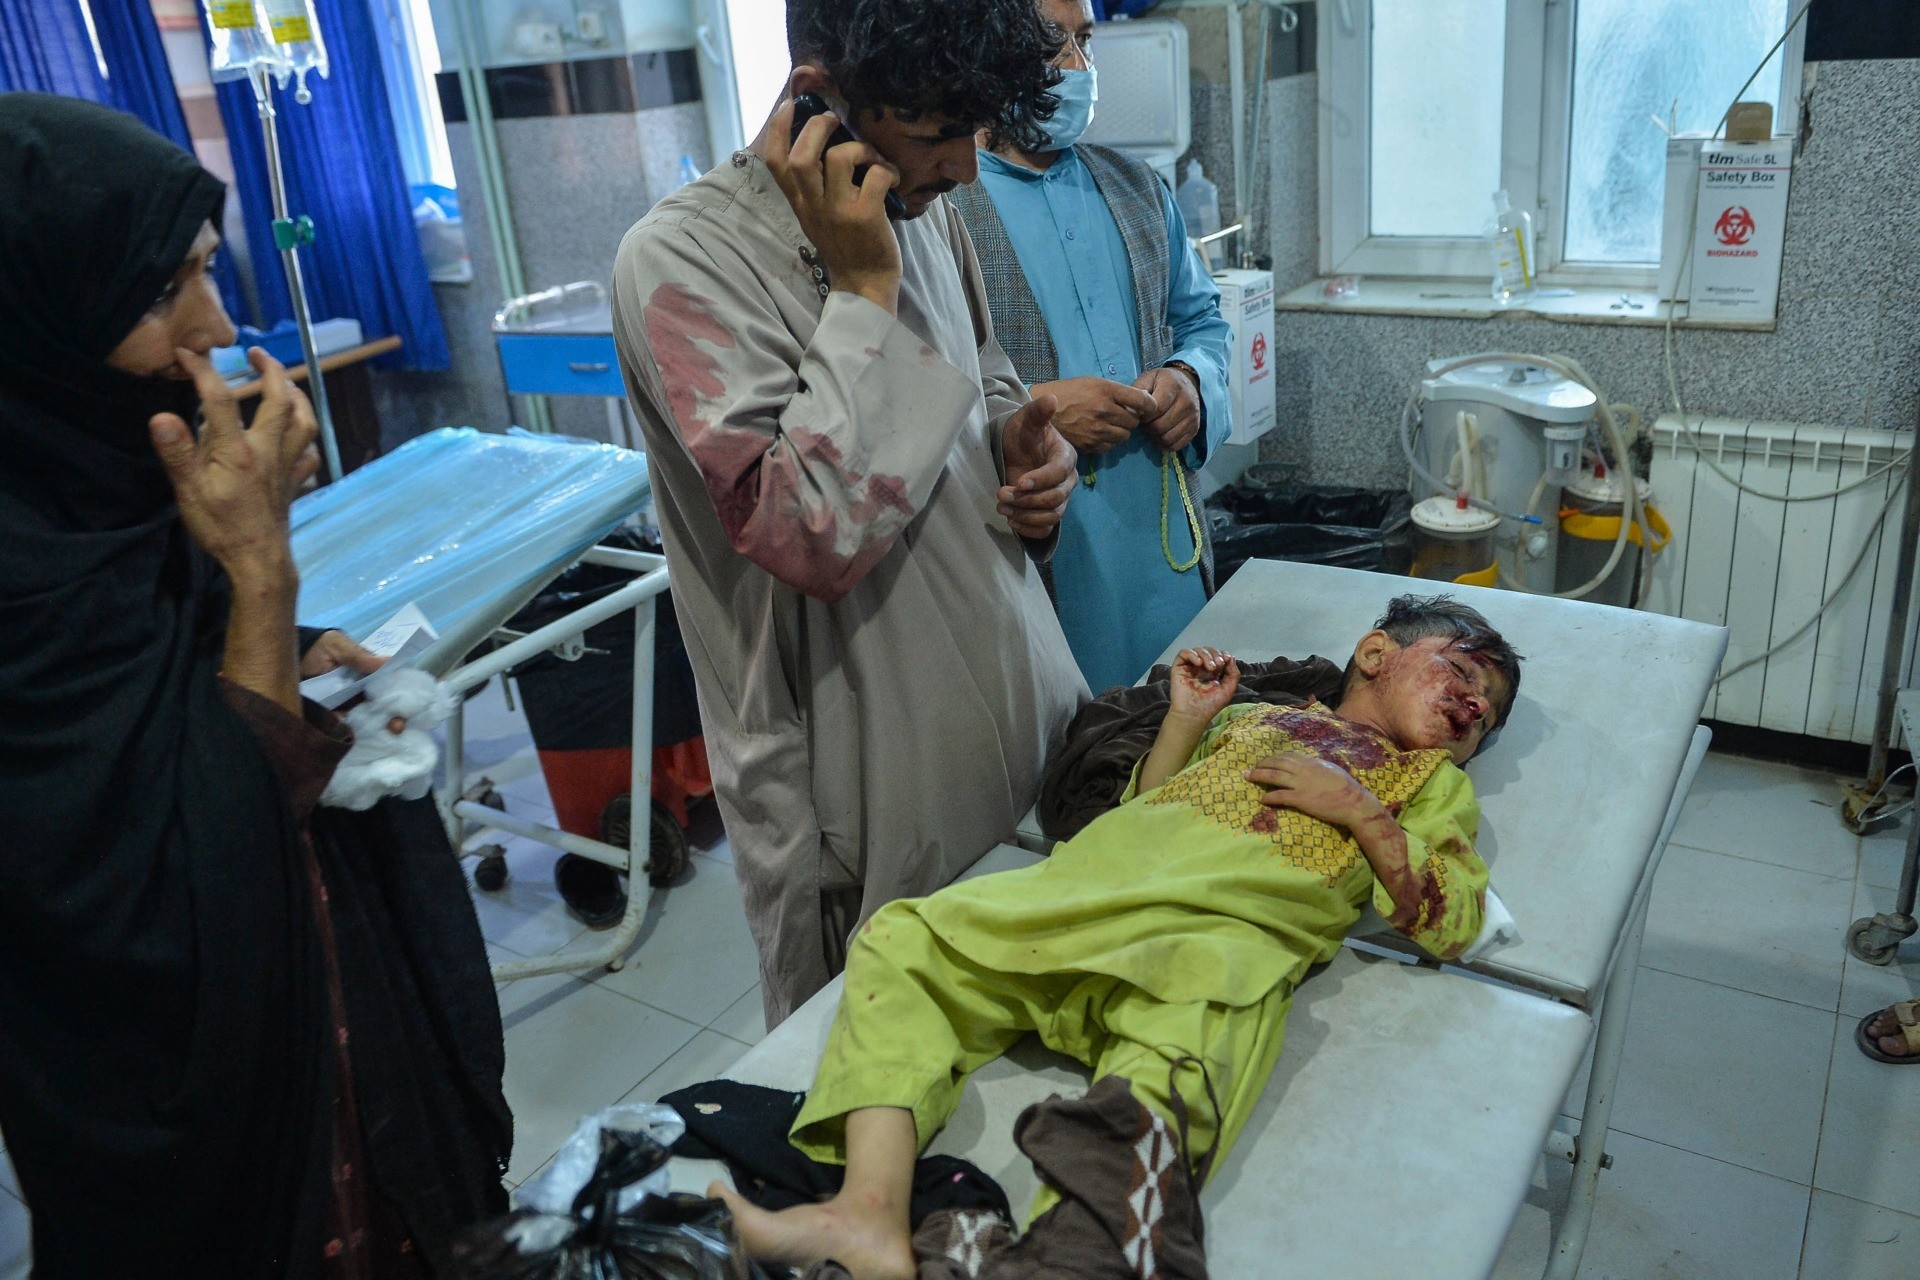 EDITORS NOTE: Graphic content / A child lies on a bed awaiting treatment at a ward of the Central hospital in Herat on August 1, 2021 after he was injured during the skirmishes between Afghan forces and Taliban. (Photo by HOSHANG HASHIMI / AFP) (Photo by HOSHANG HASHIMI/AFP via Getty Images)